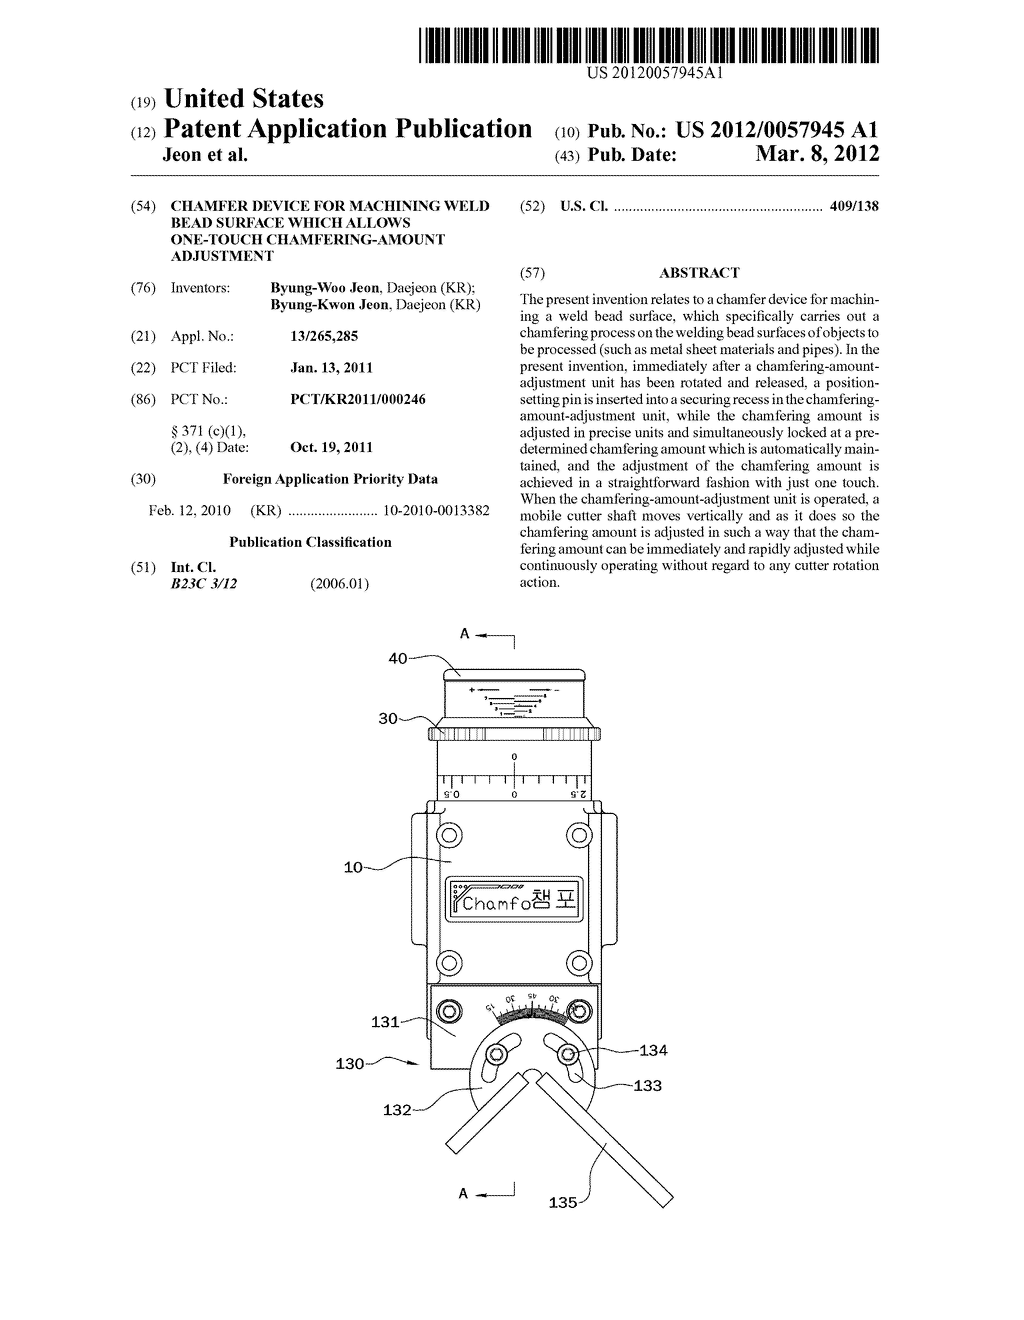 CHAMFER DEVICE FOR MACHINING WELD BEAD SURFACE WHICH ALLOWS ONE-TOUCH     CHAMFERING-AMOUNT ADJUSTMENT - diagram, schematic, and image 01